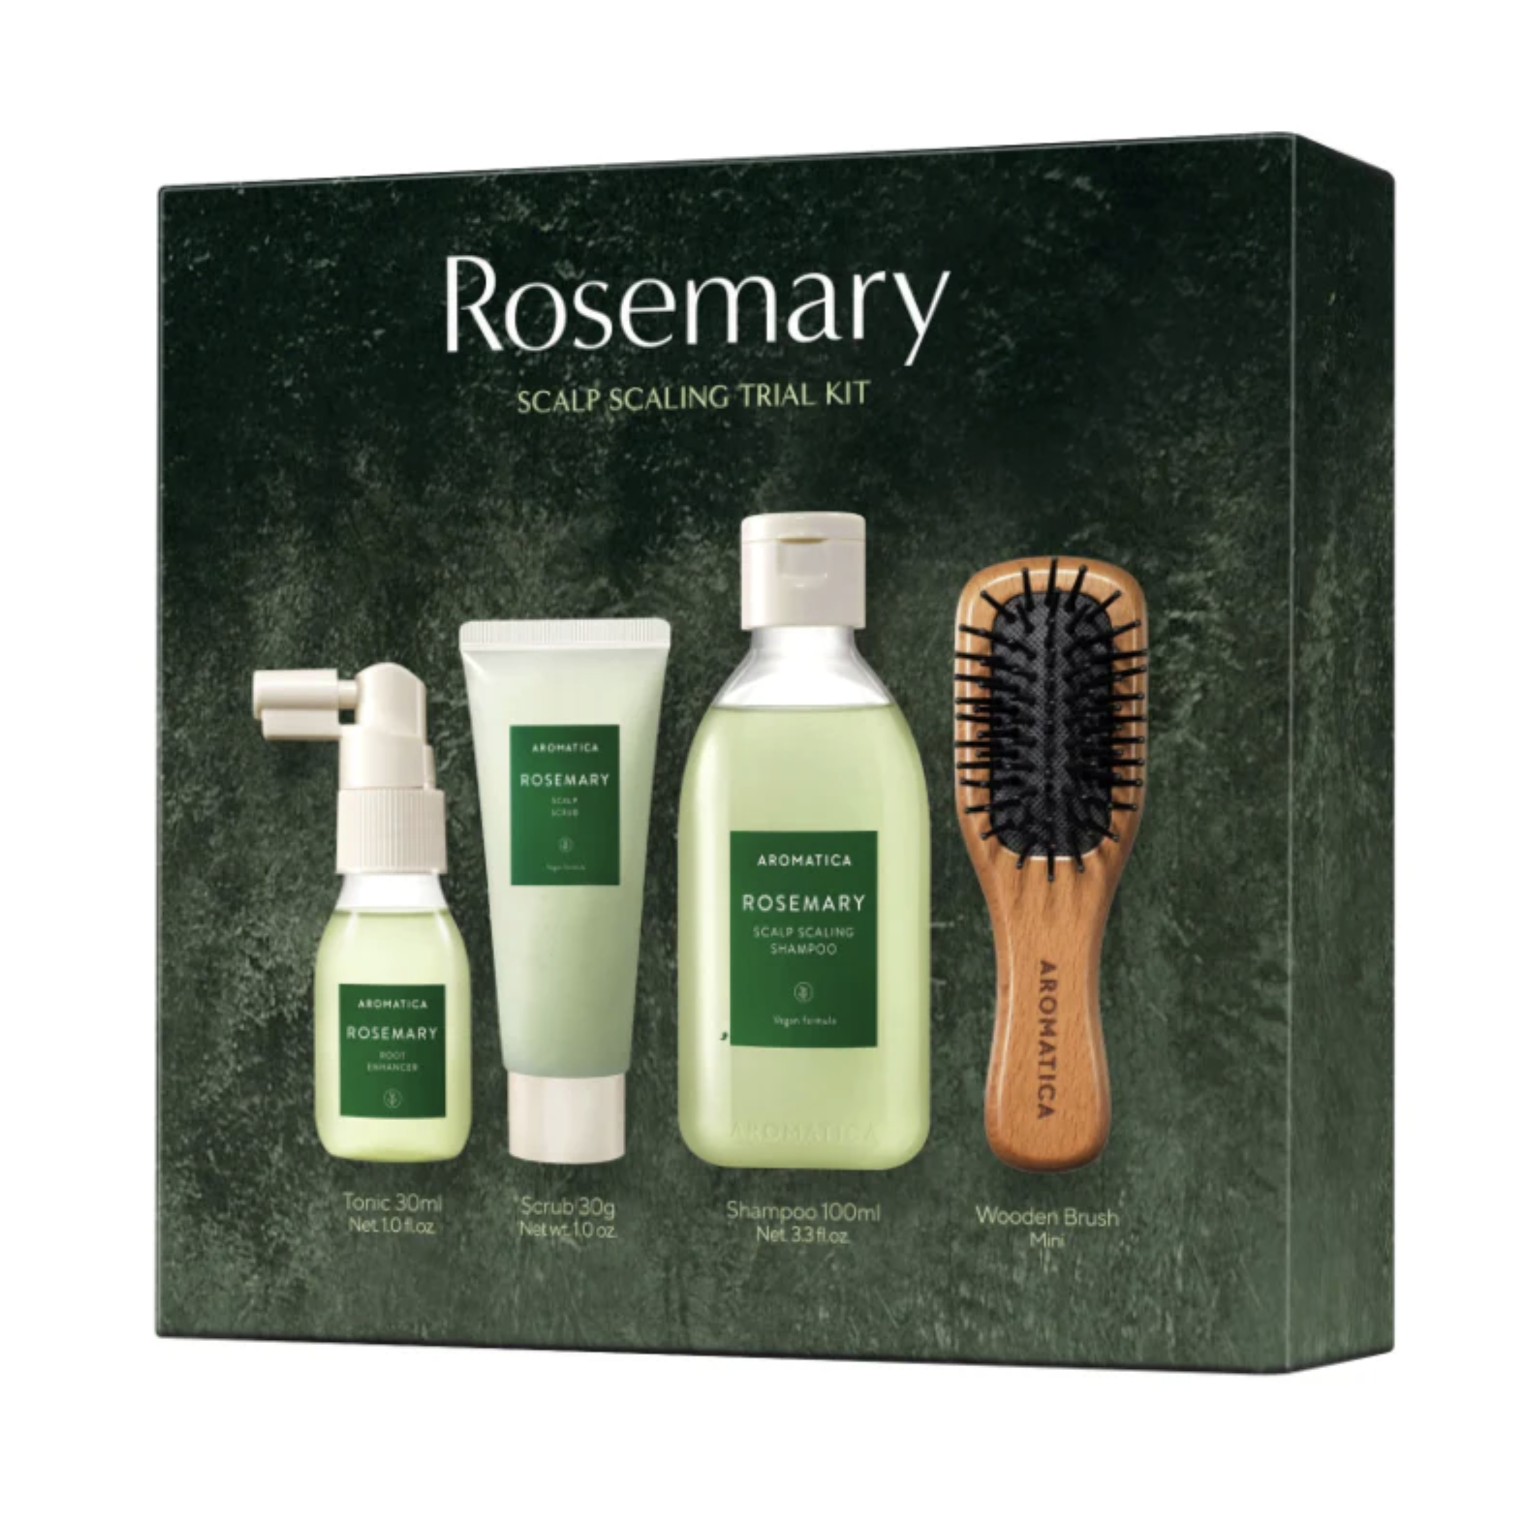 Aromatica Rosmary Scalp Scaling Trial Kit